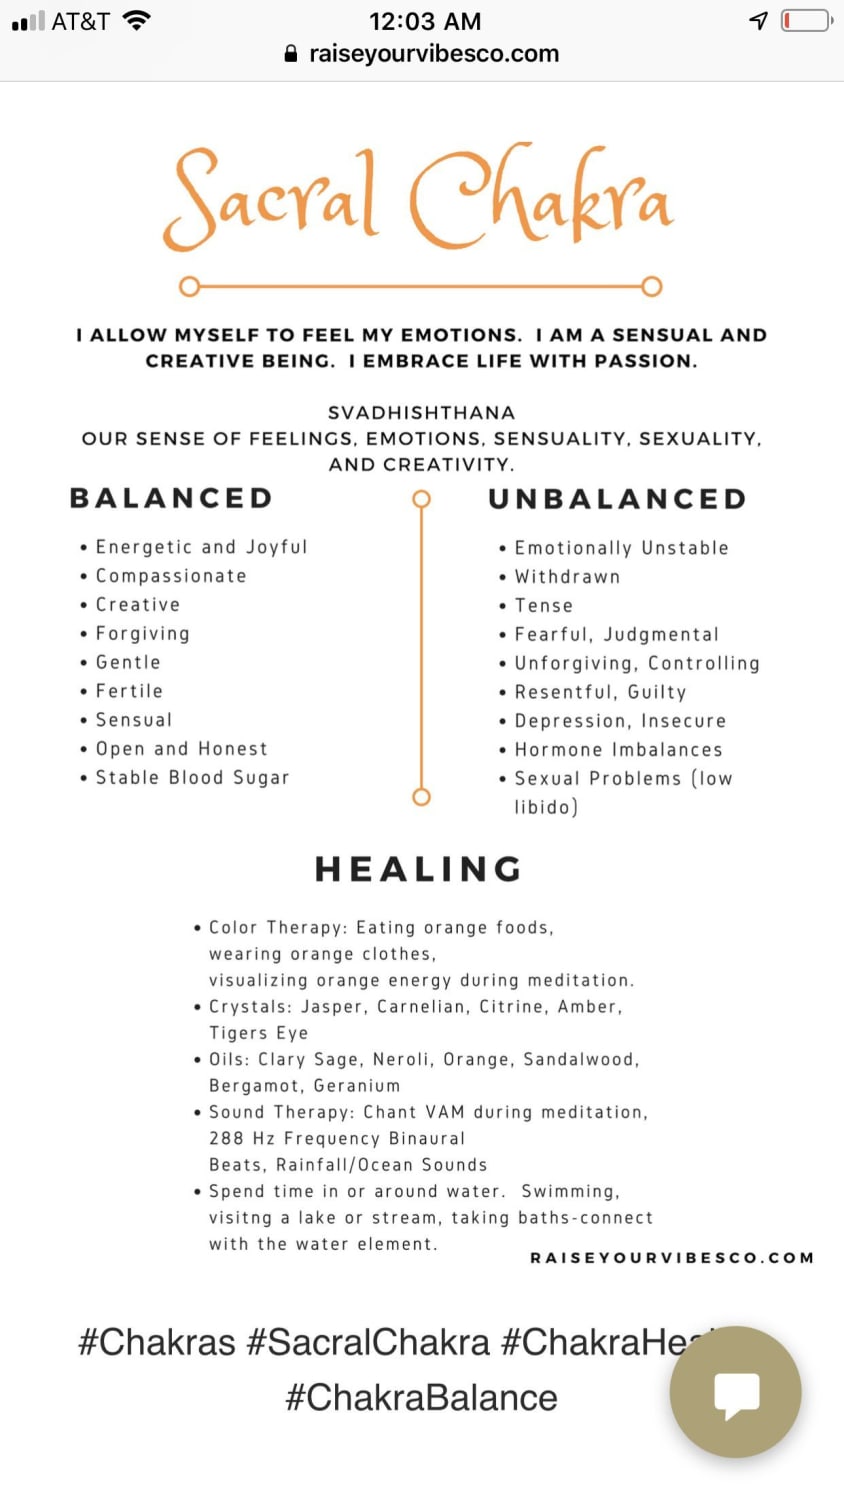 Pin by Reigning Freedom ~ Leah Brewer on Health and wellness | Sacral chakra healing, Chakra healing meditation, Reiki healing learning